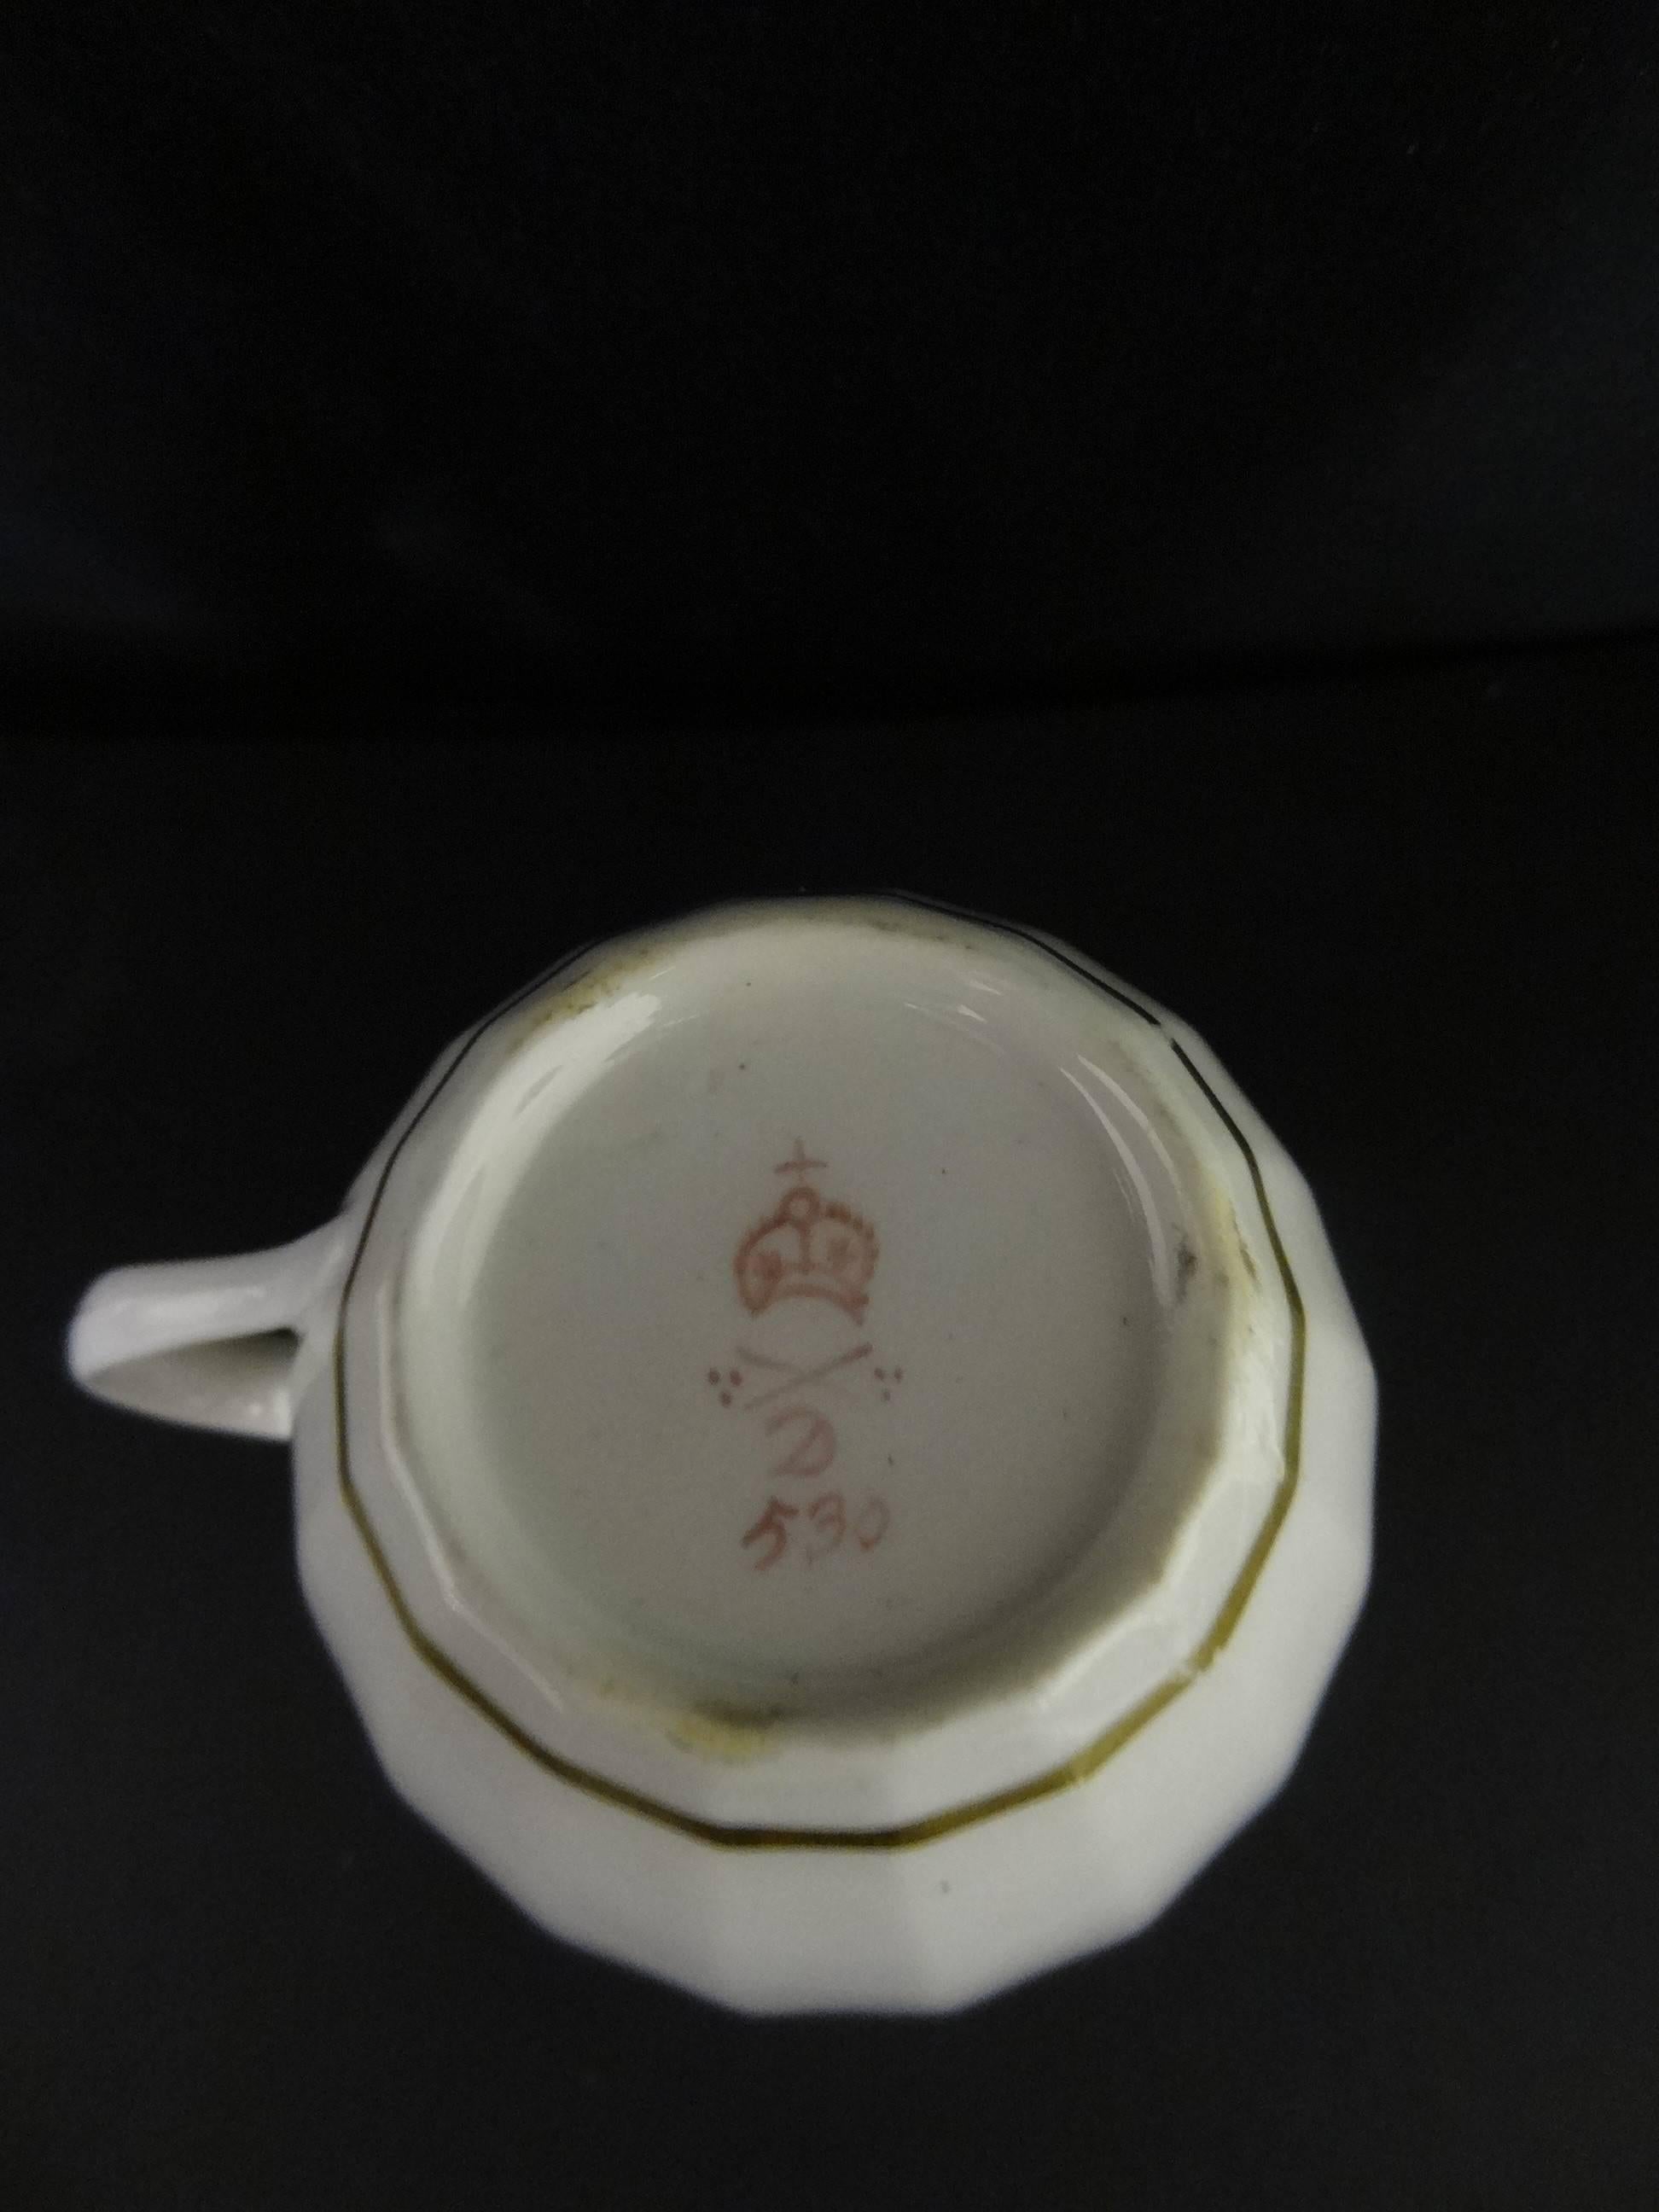 Derby Fluted Porcelain Cup and Saucer Pattern 530, Puce Mark 2